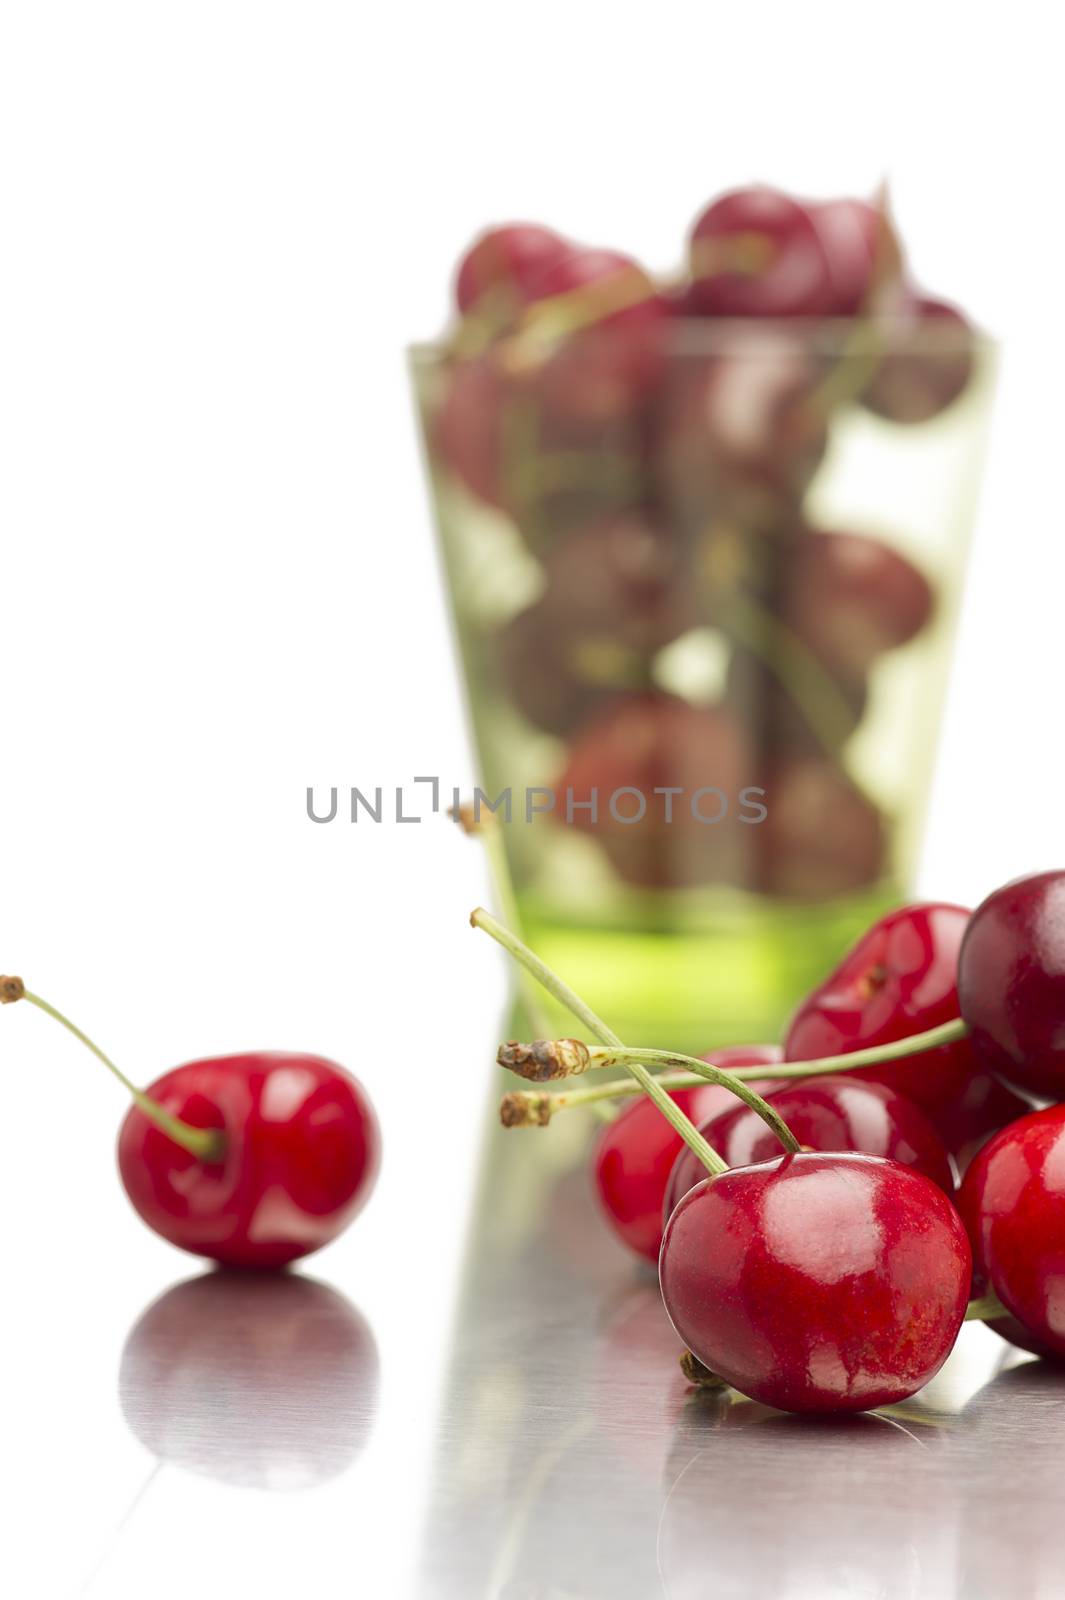 Loose delicious healthy ripe red cherries on a reflective surface with a glass full in the background with focus to the fruit in the front, on white with copyspace